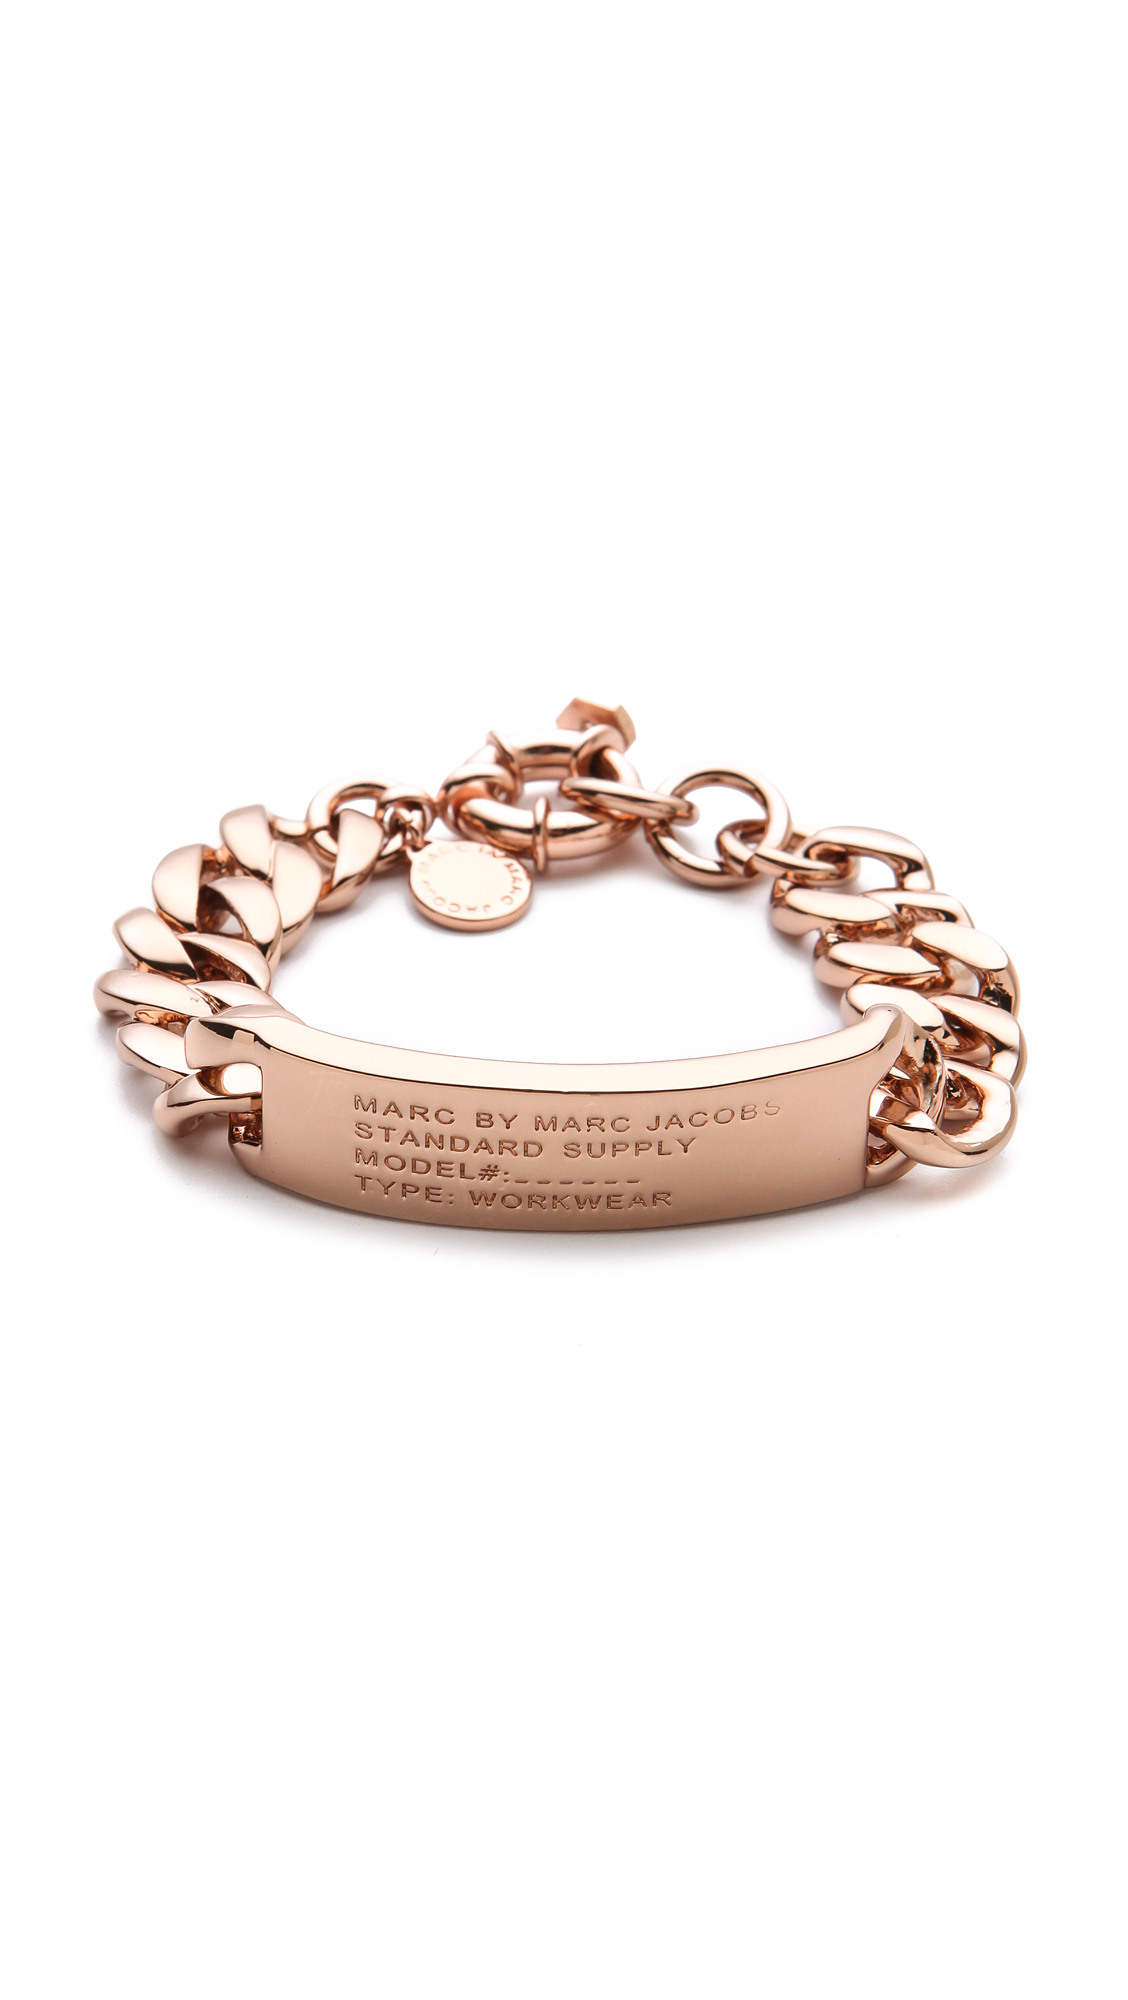 Marc By Marc Jacobs Standard Supply Id Bracelet in Gold (Rose Gold) | Lyst